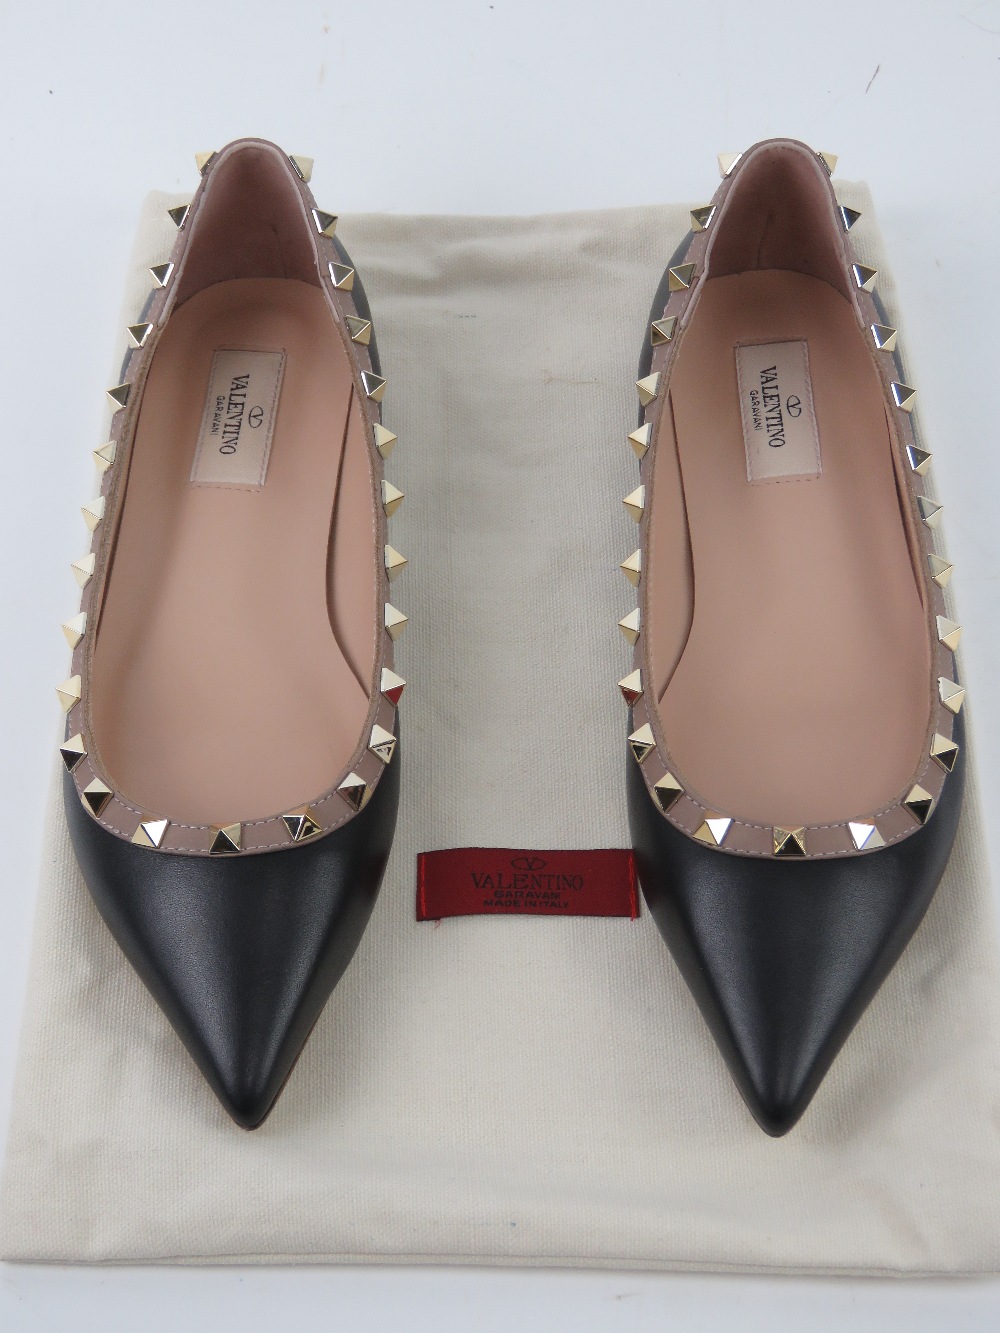 Valentino Garavani Rockstud pointed toe flat shoes in black and taupe leather, size 41, - Image 2 of 7